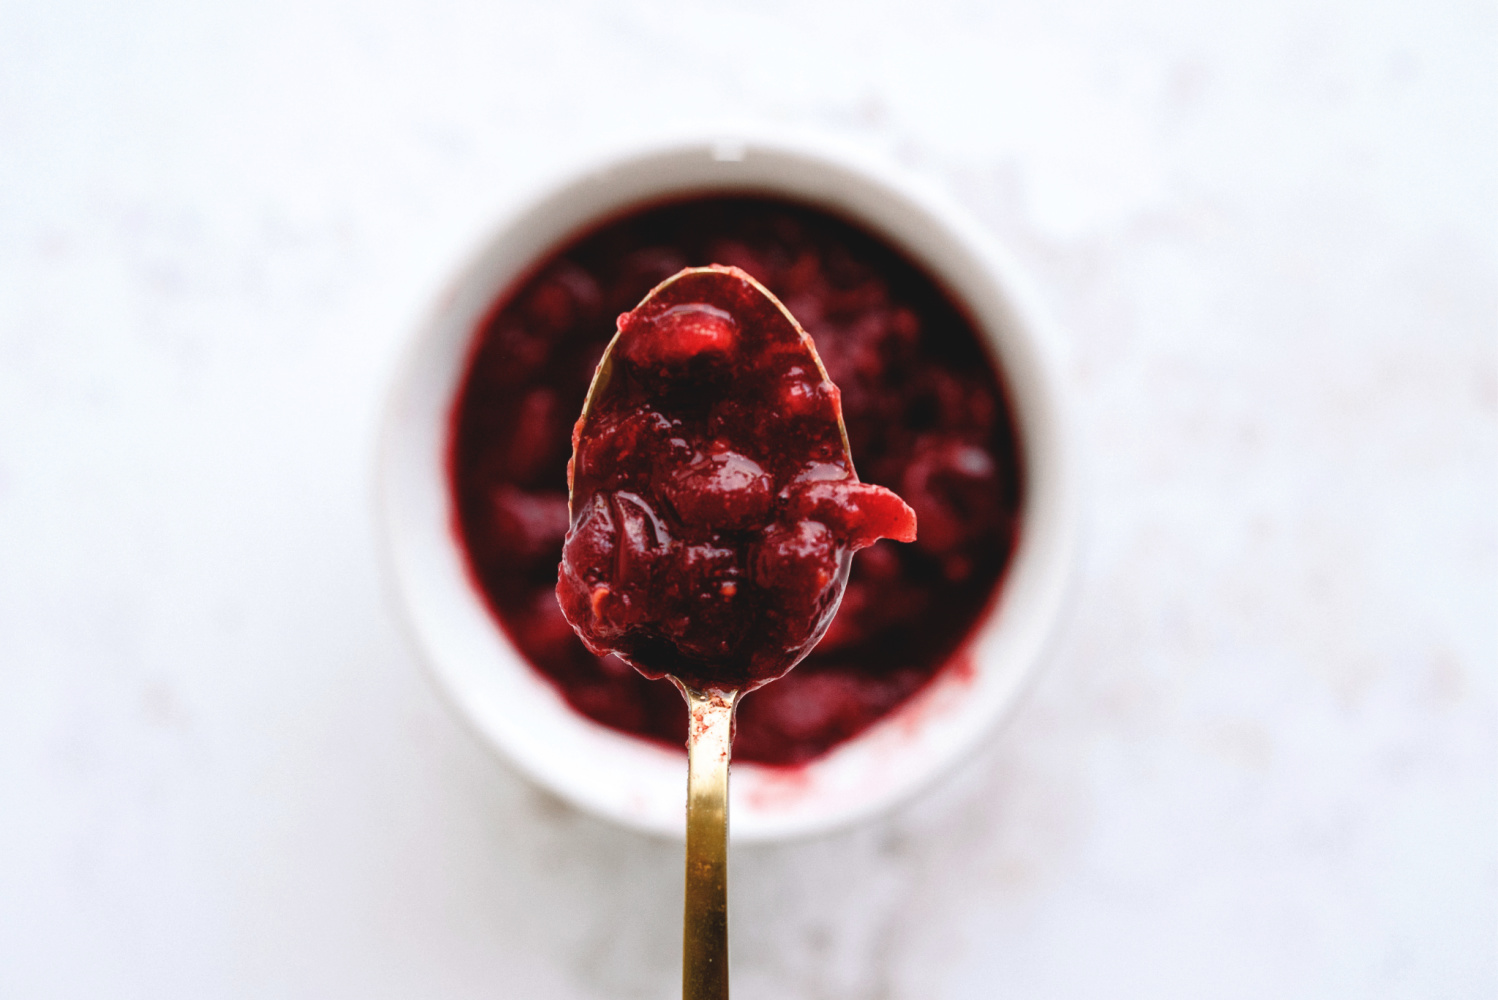 Cranberry sauce in a spoon up close